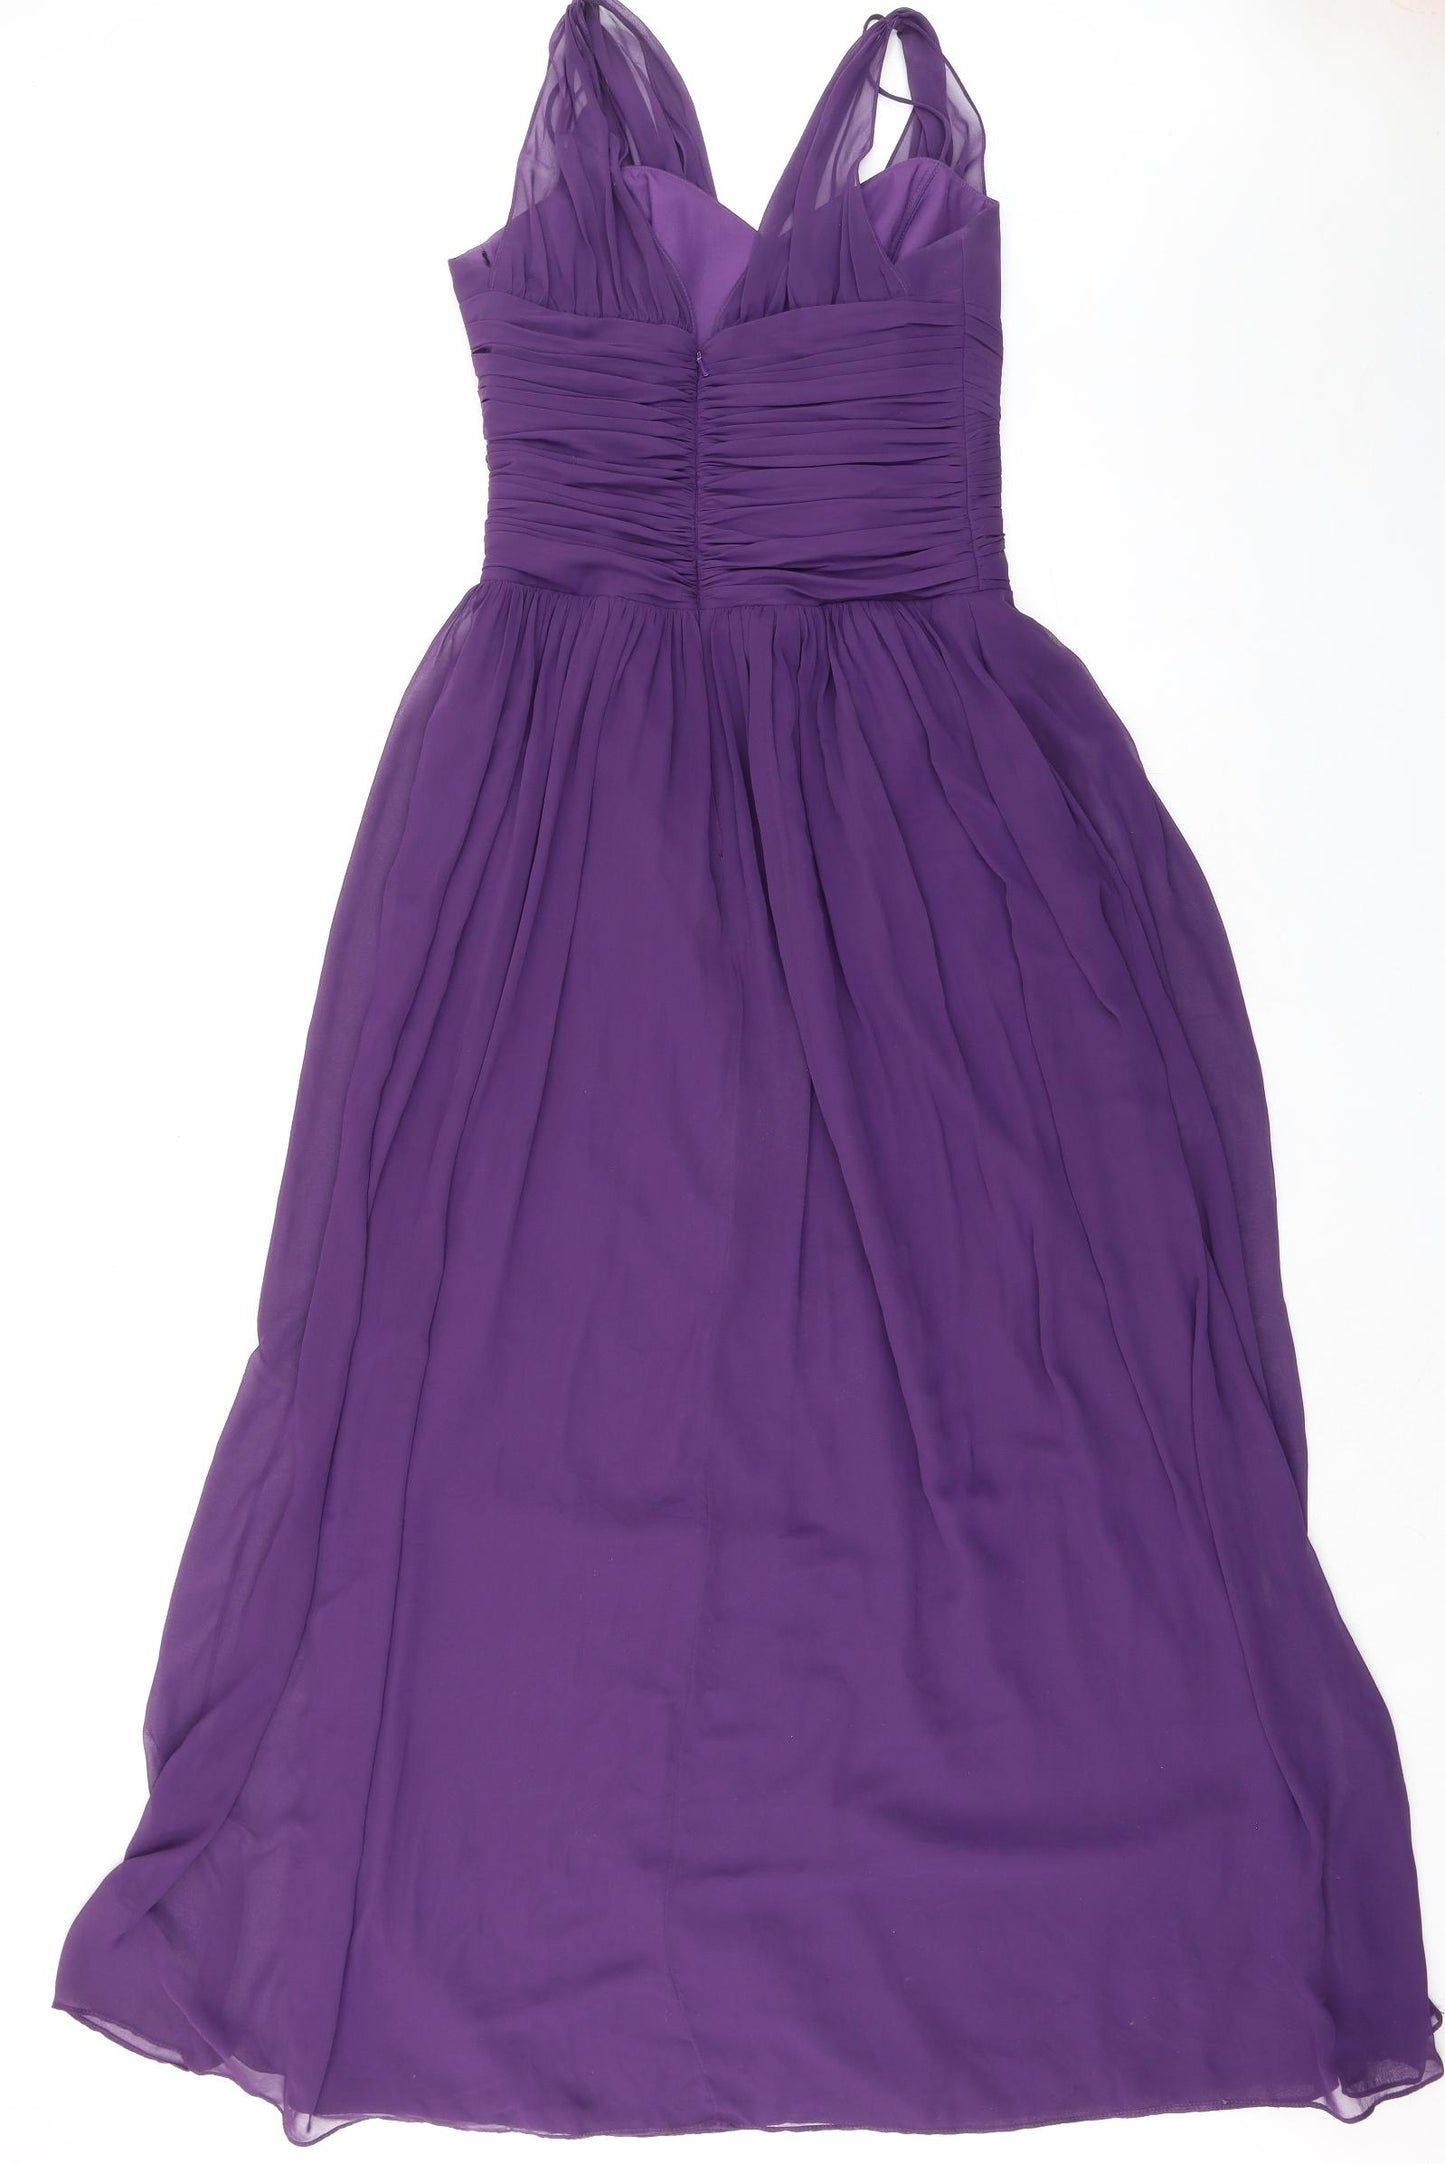 Dessy Womens Purple Polyester Ball Gown Size 8 V-Neck Zip